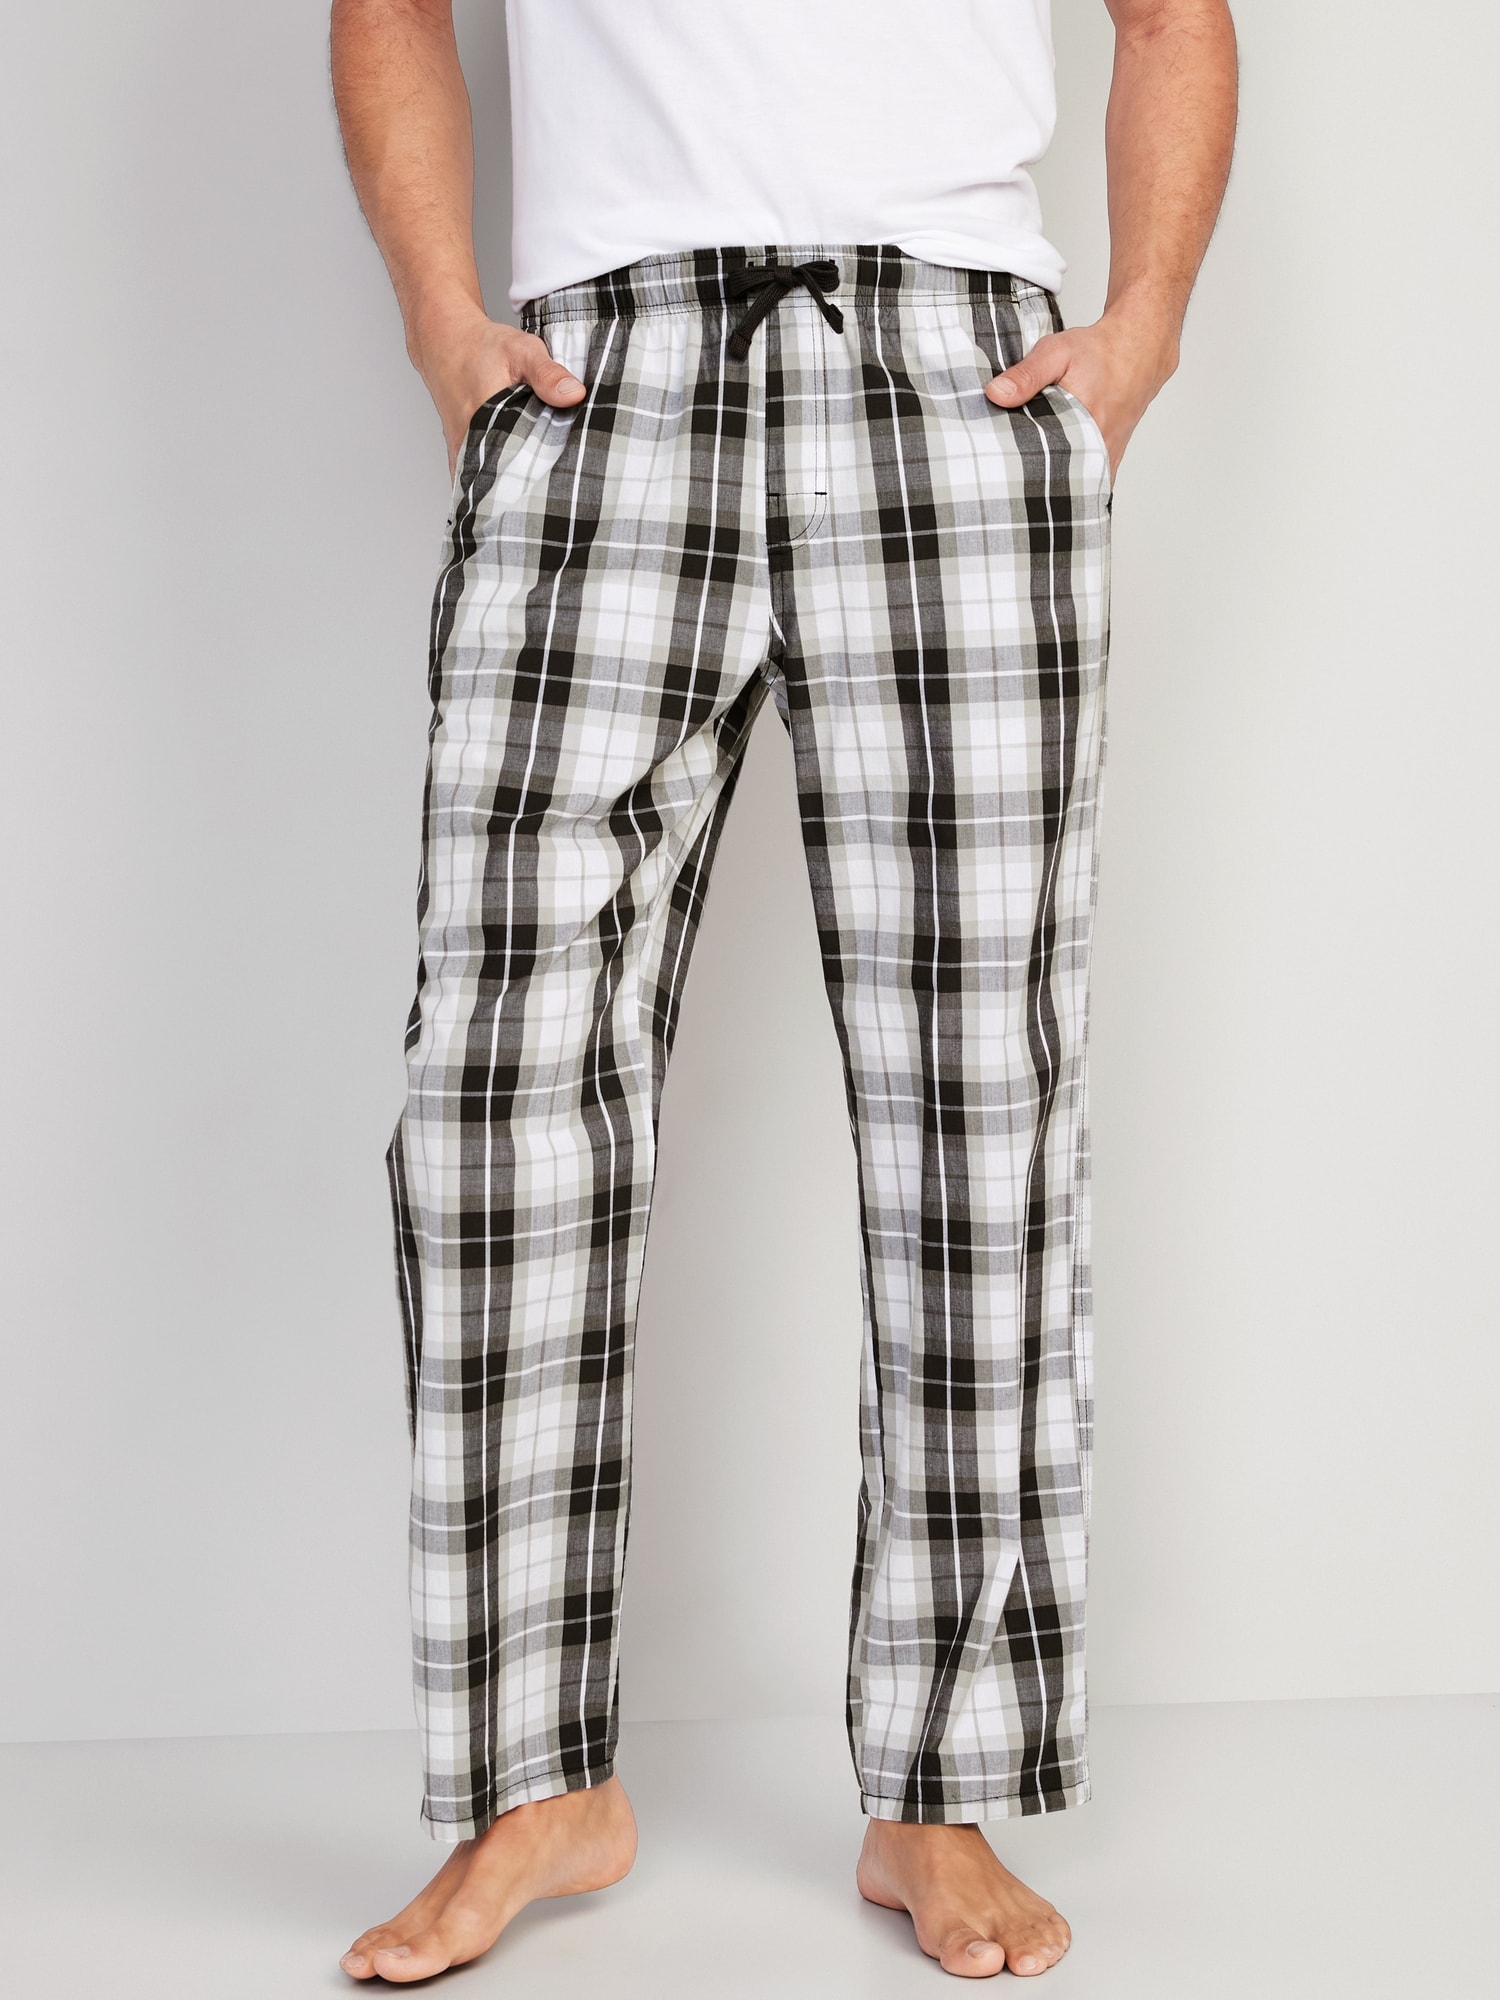 Old Navy Pajama Pants Just $7 Shipped (Regularly $20) - Includes Plus Sizes  Too